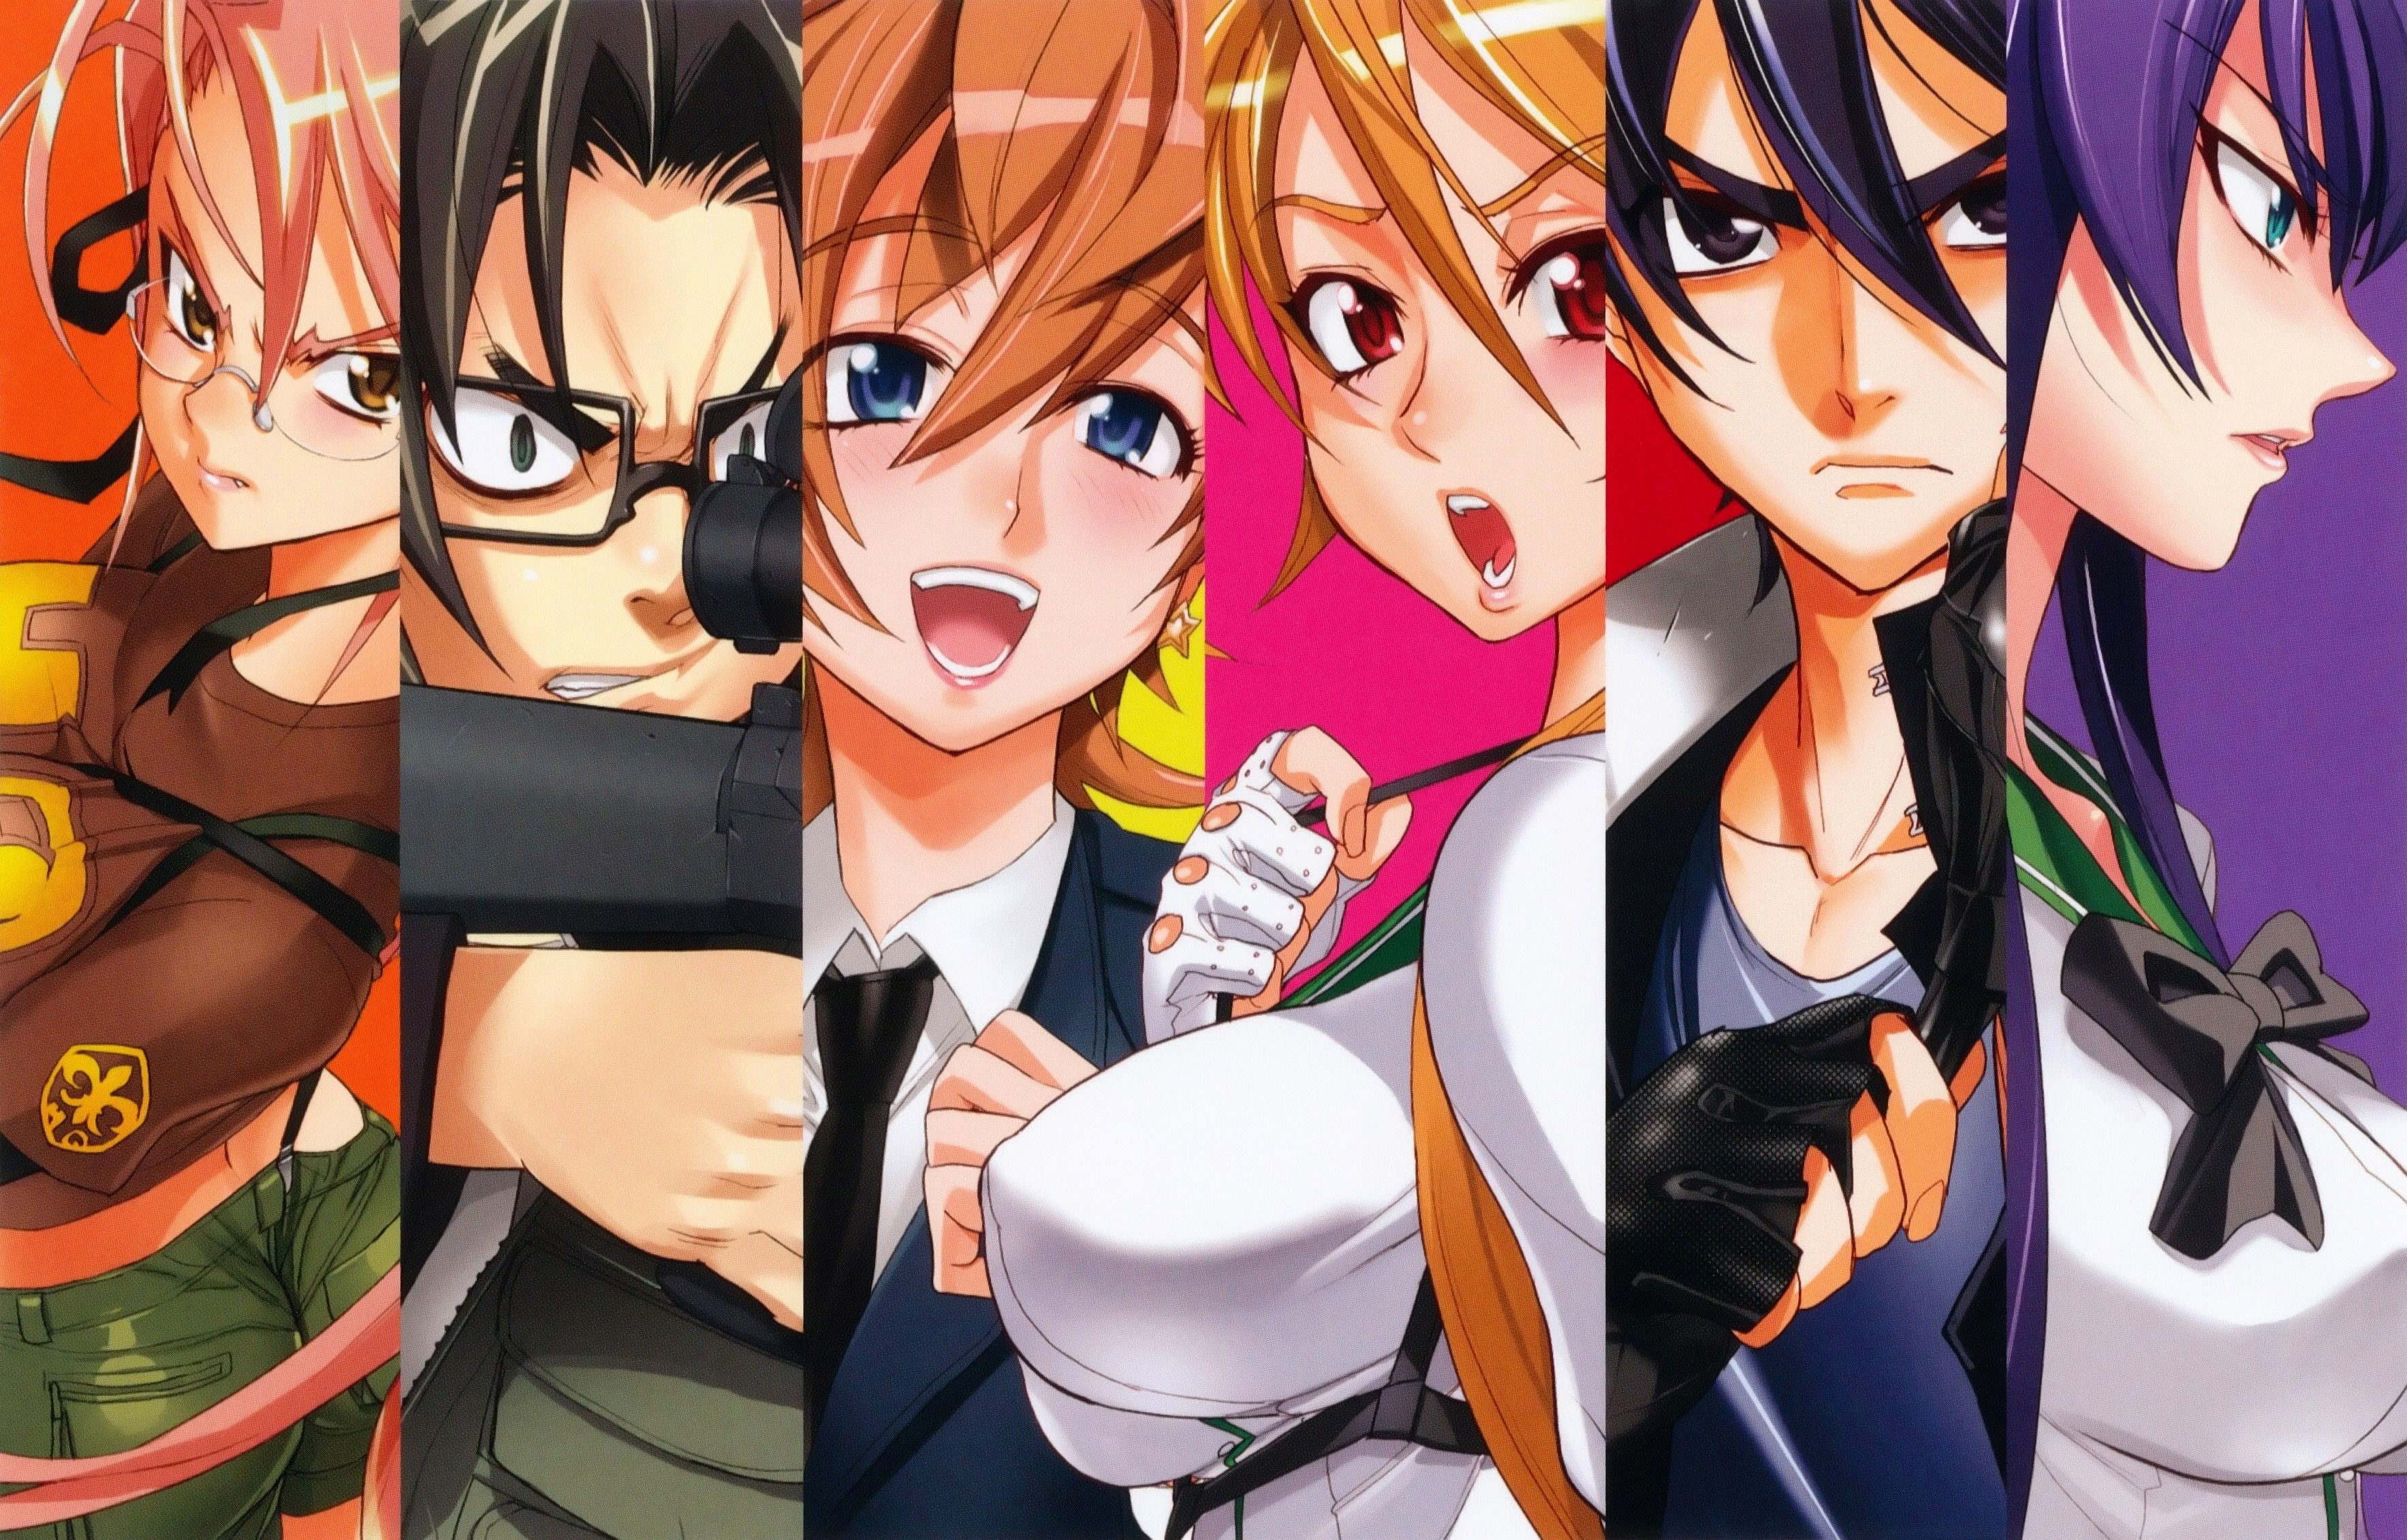 70+ Highschool Of The Dead HD Wallpapers and Backgrounds